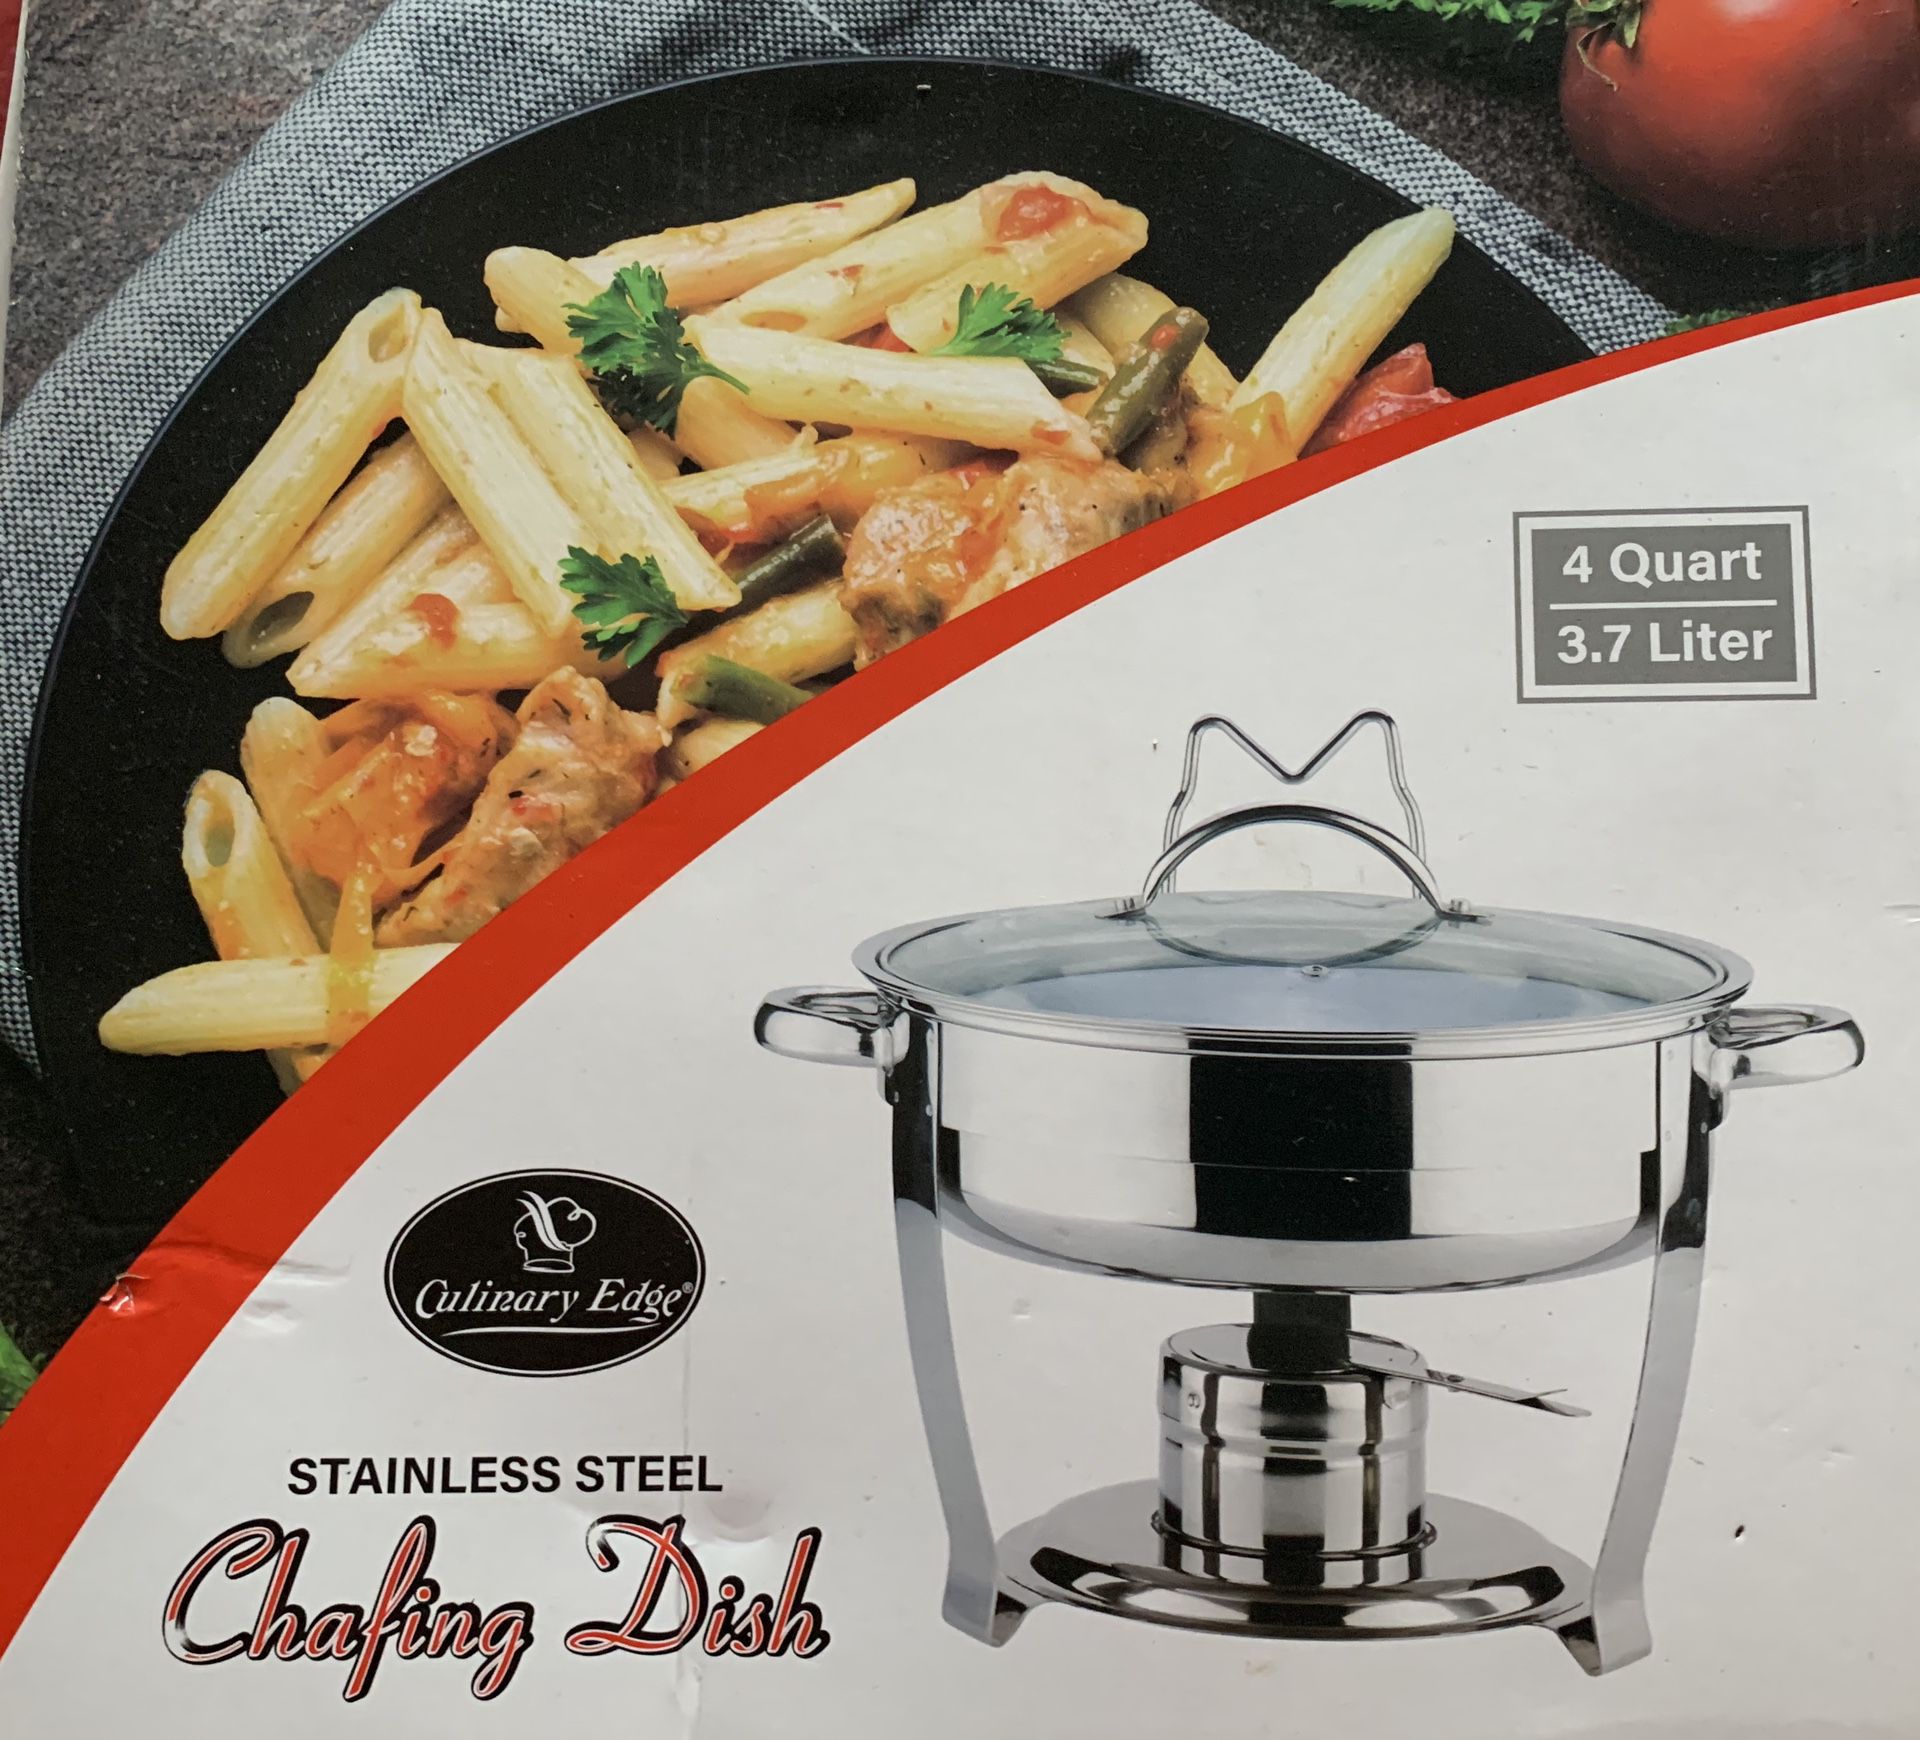 Culinary Edge Stainless Steal Chafing Dish